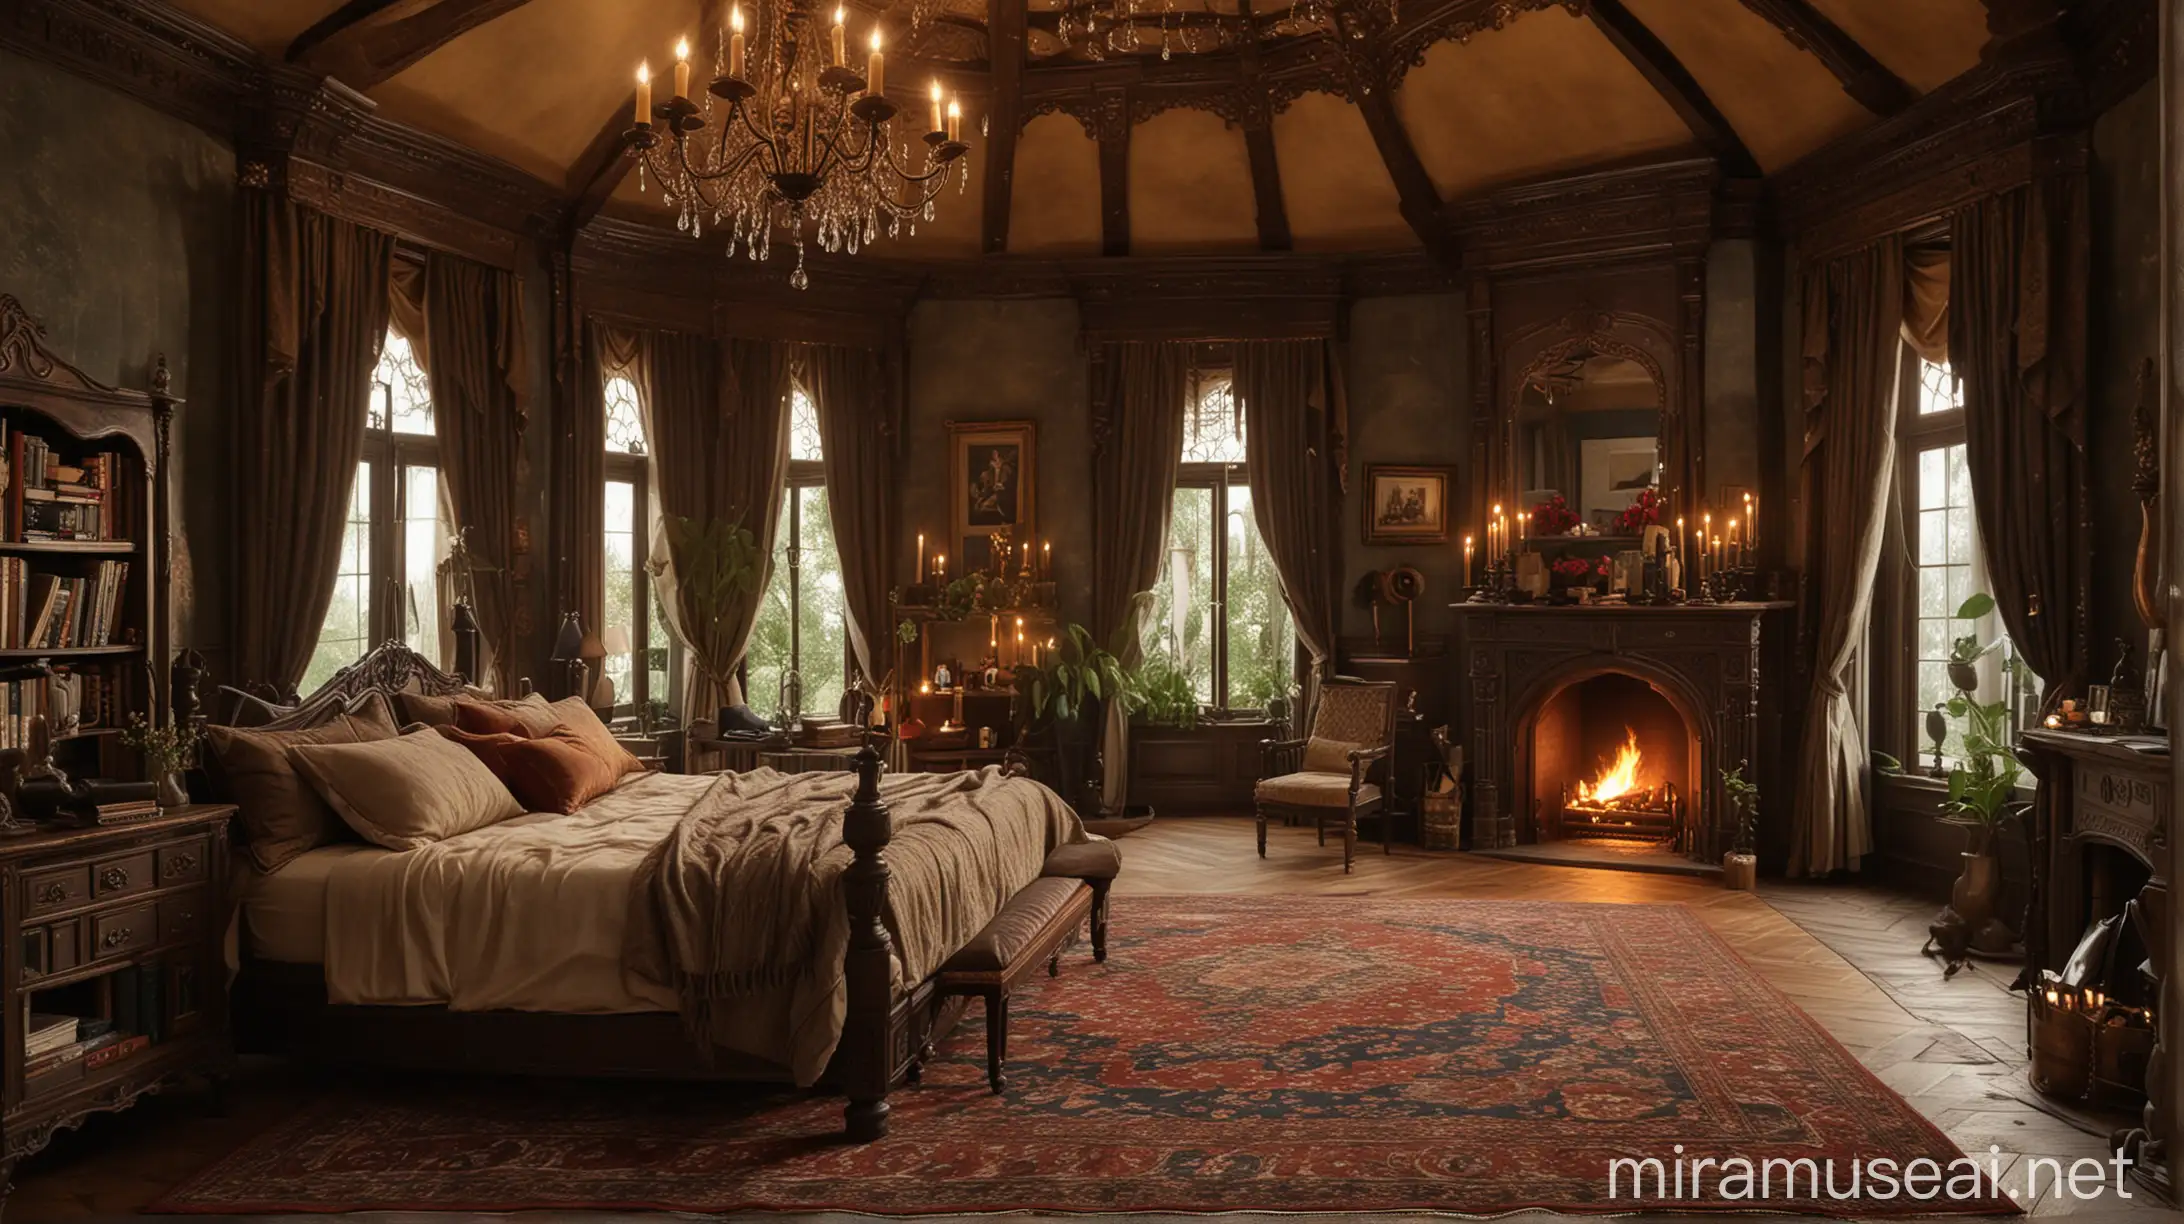 Opulent Gothic Bedroom with Fireplace and Plush Bed